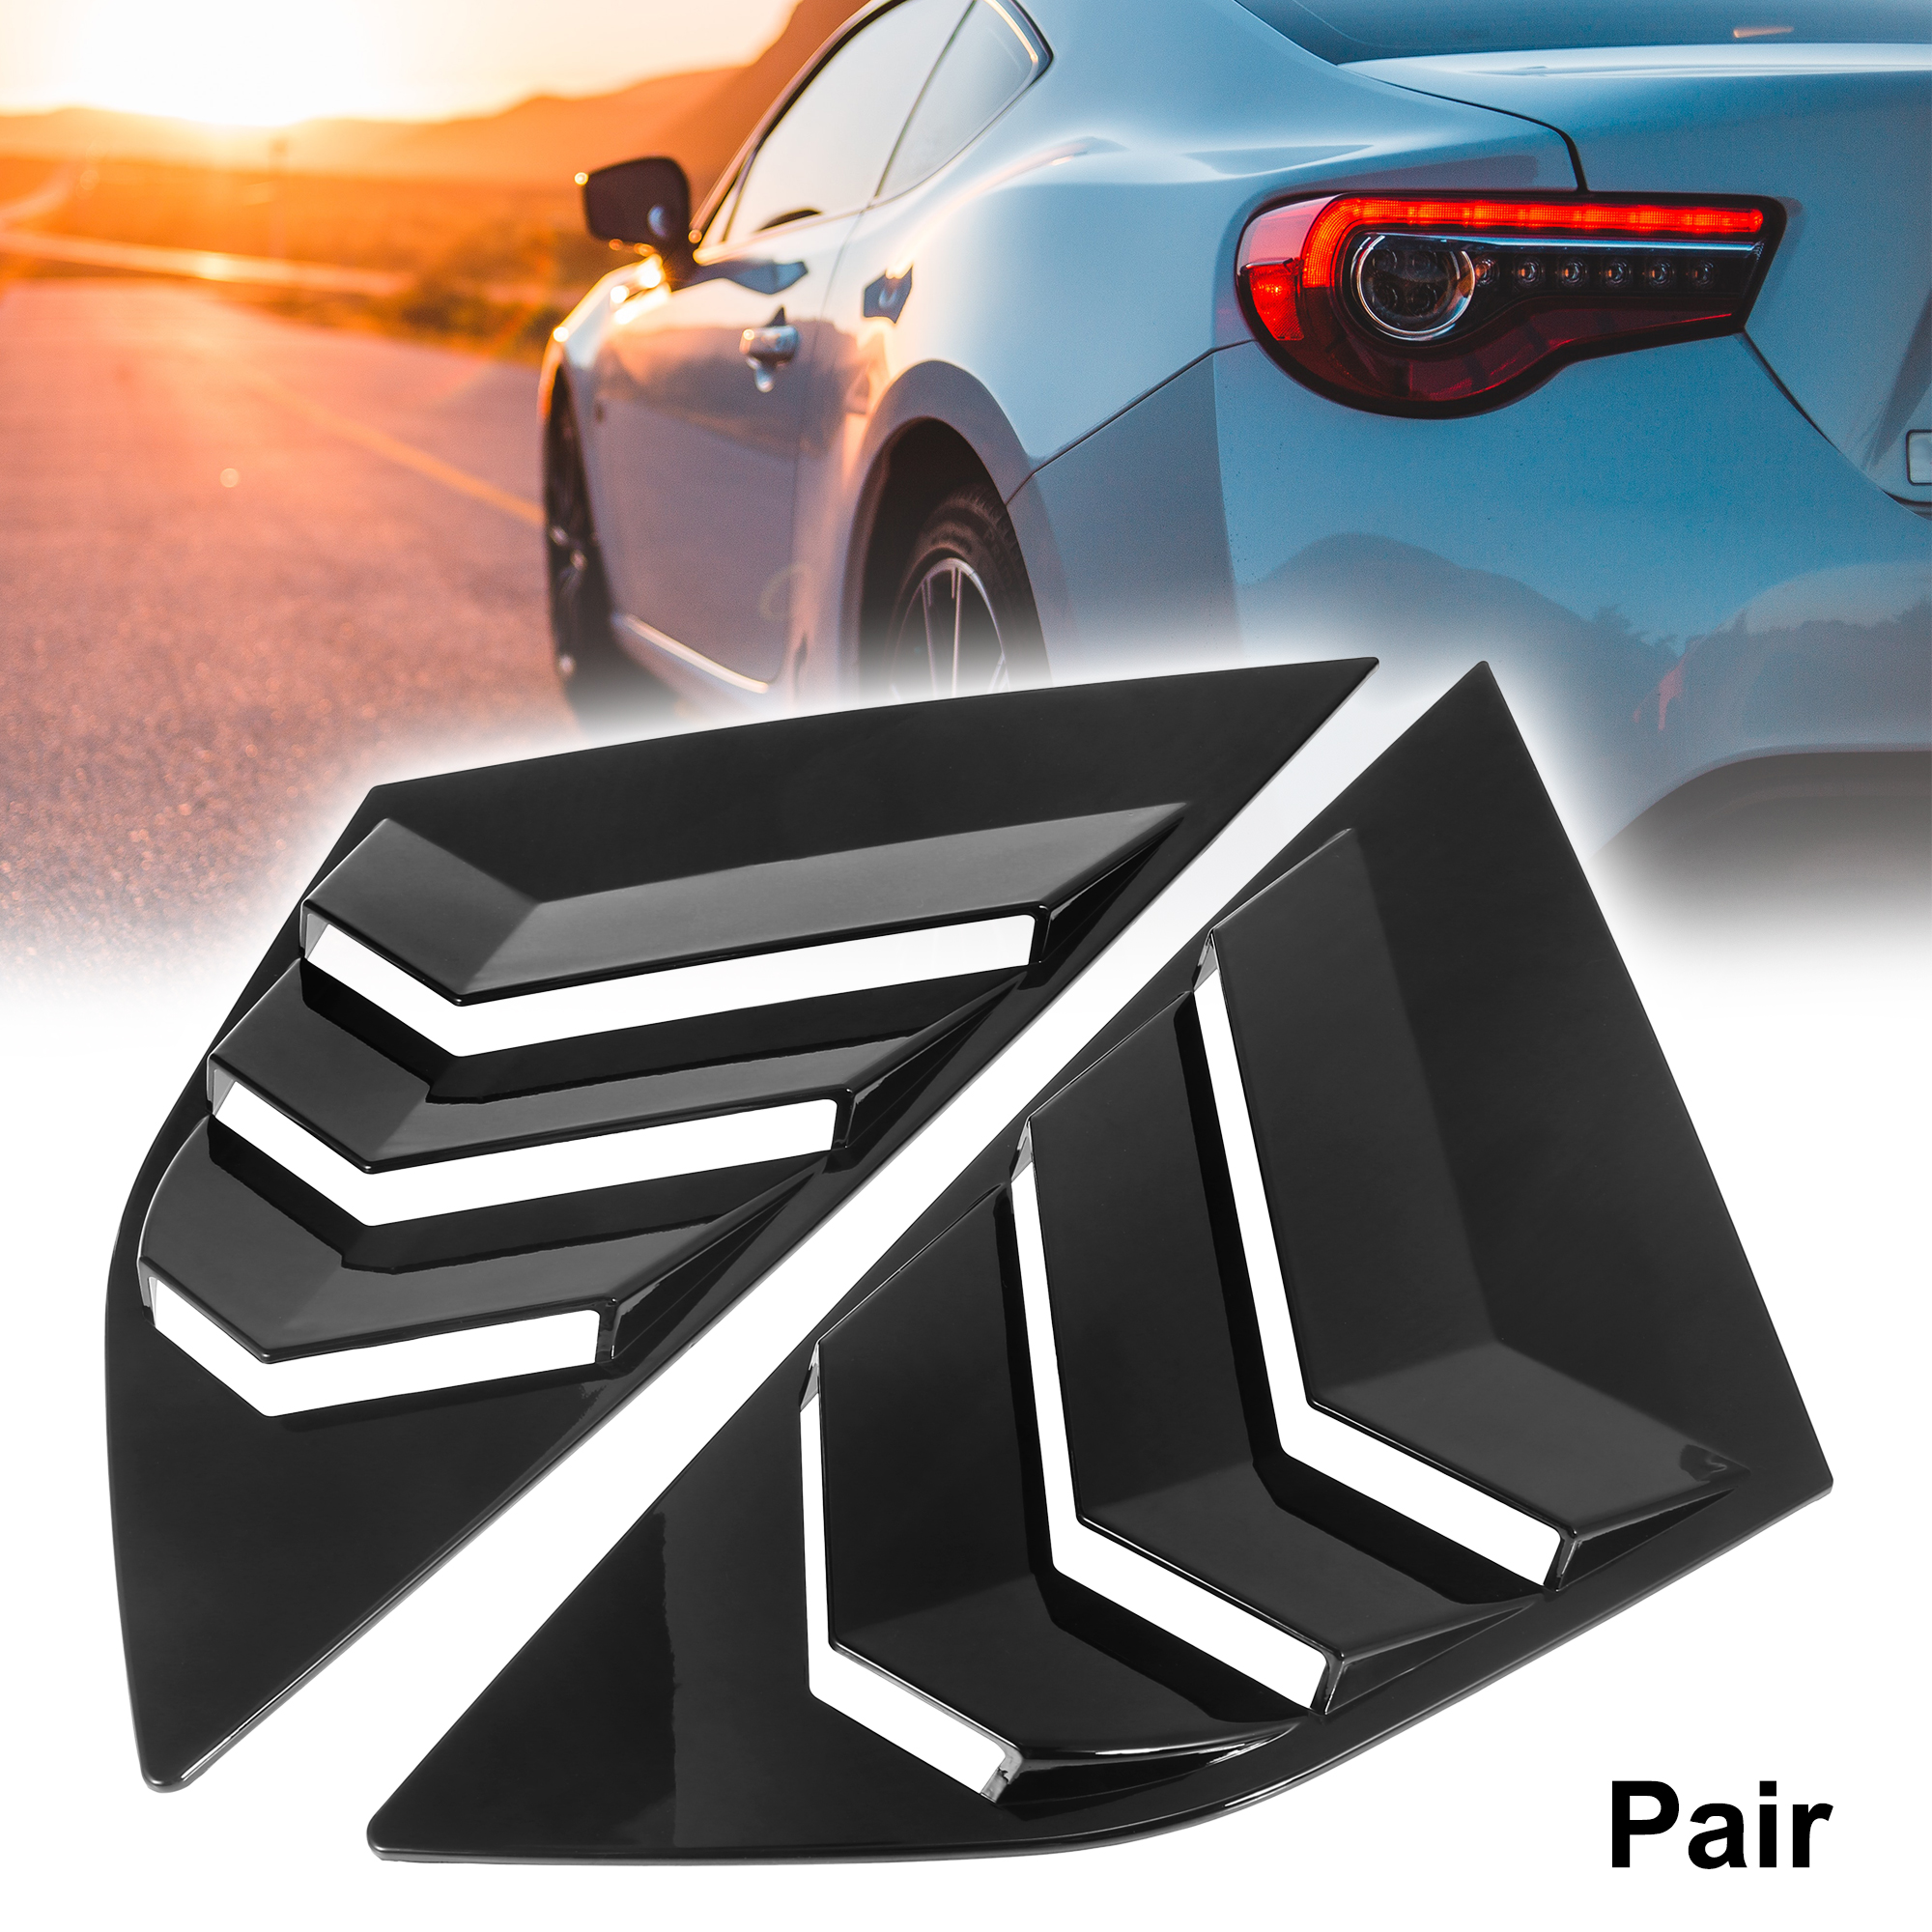 Unique Bargains Pair Car Rear Side Window Louvers Cover for Ford Focus 2012-2018 Gloss Black